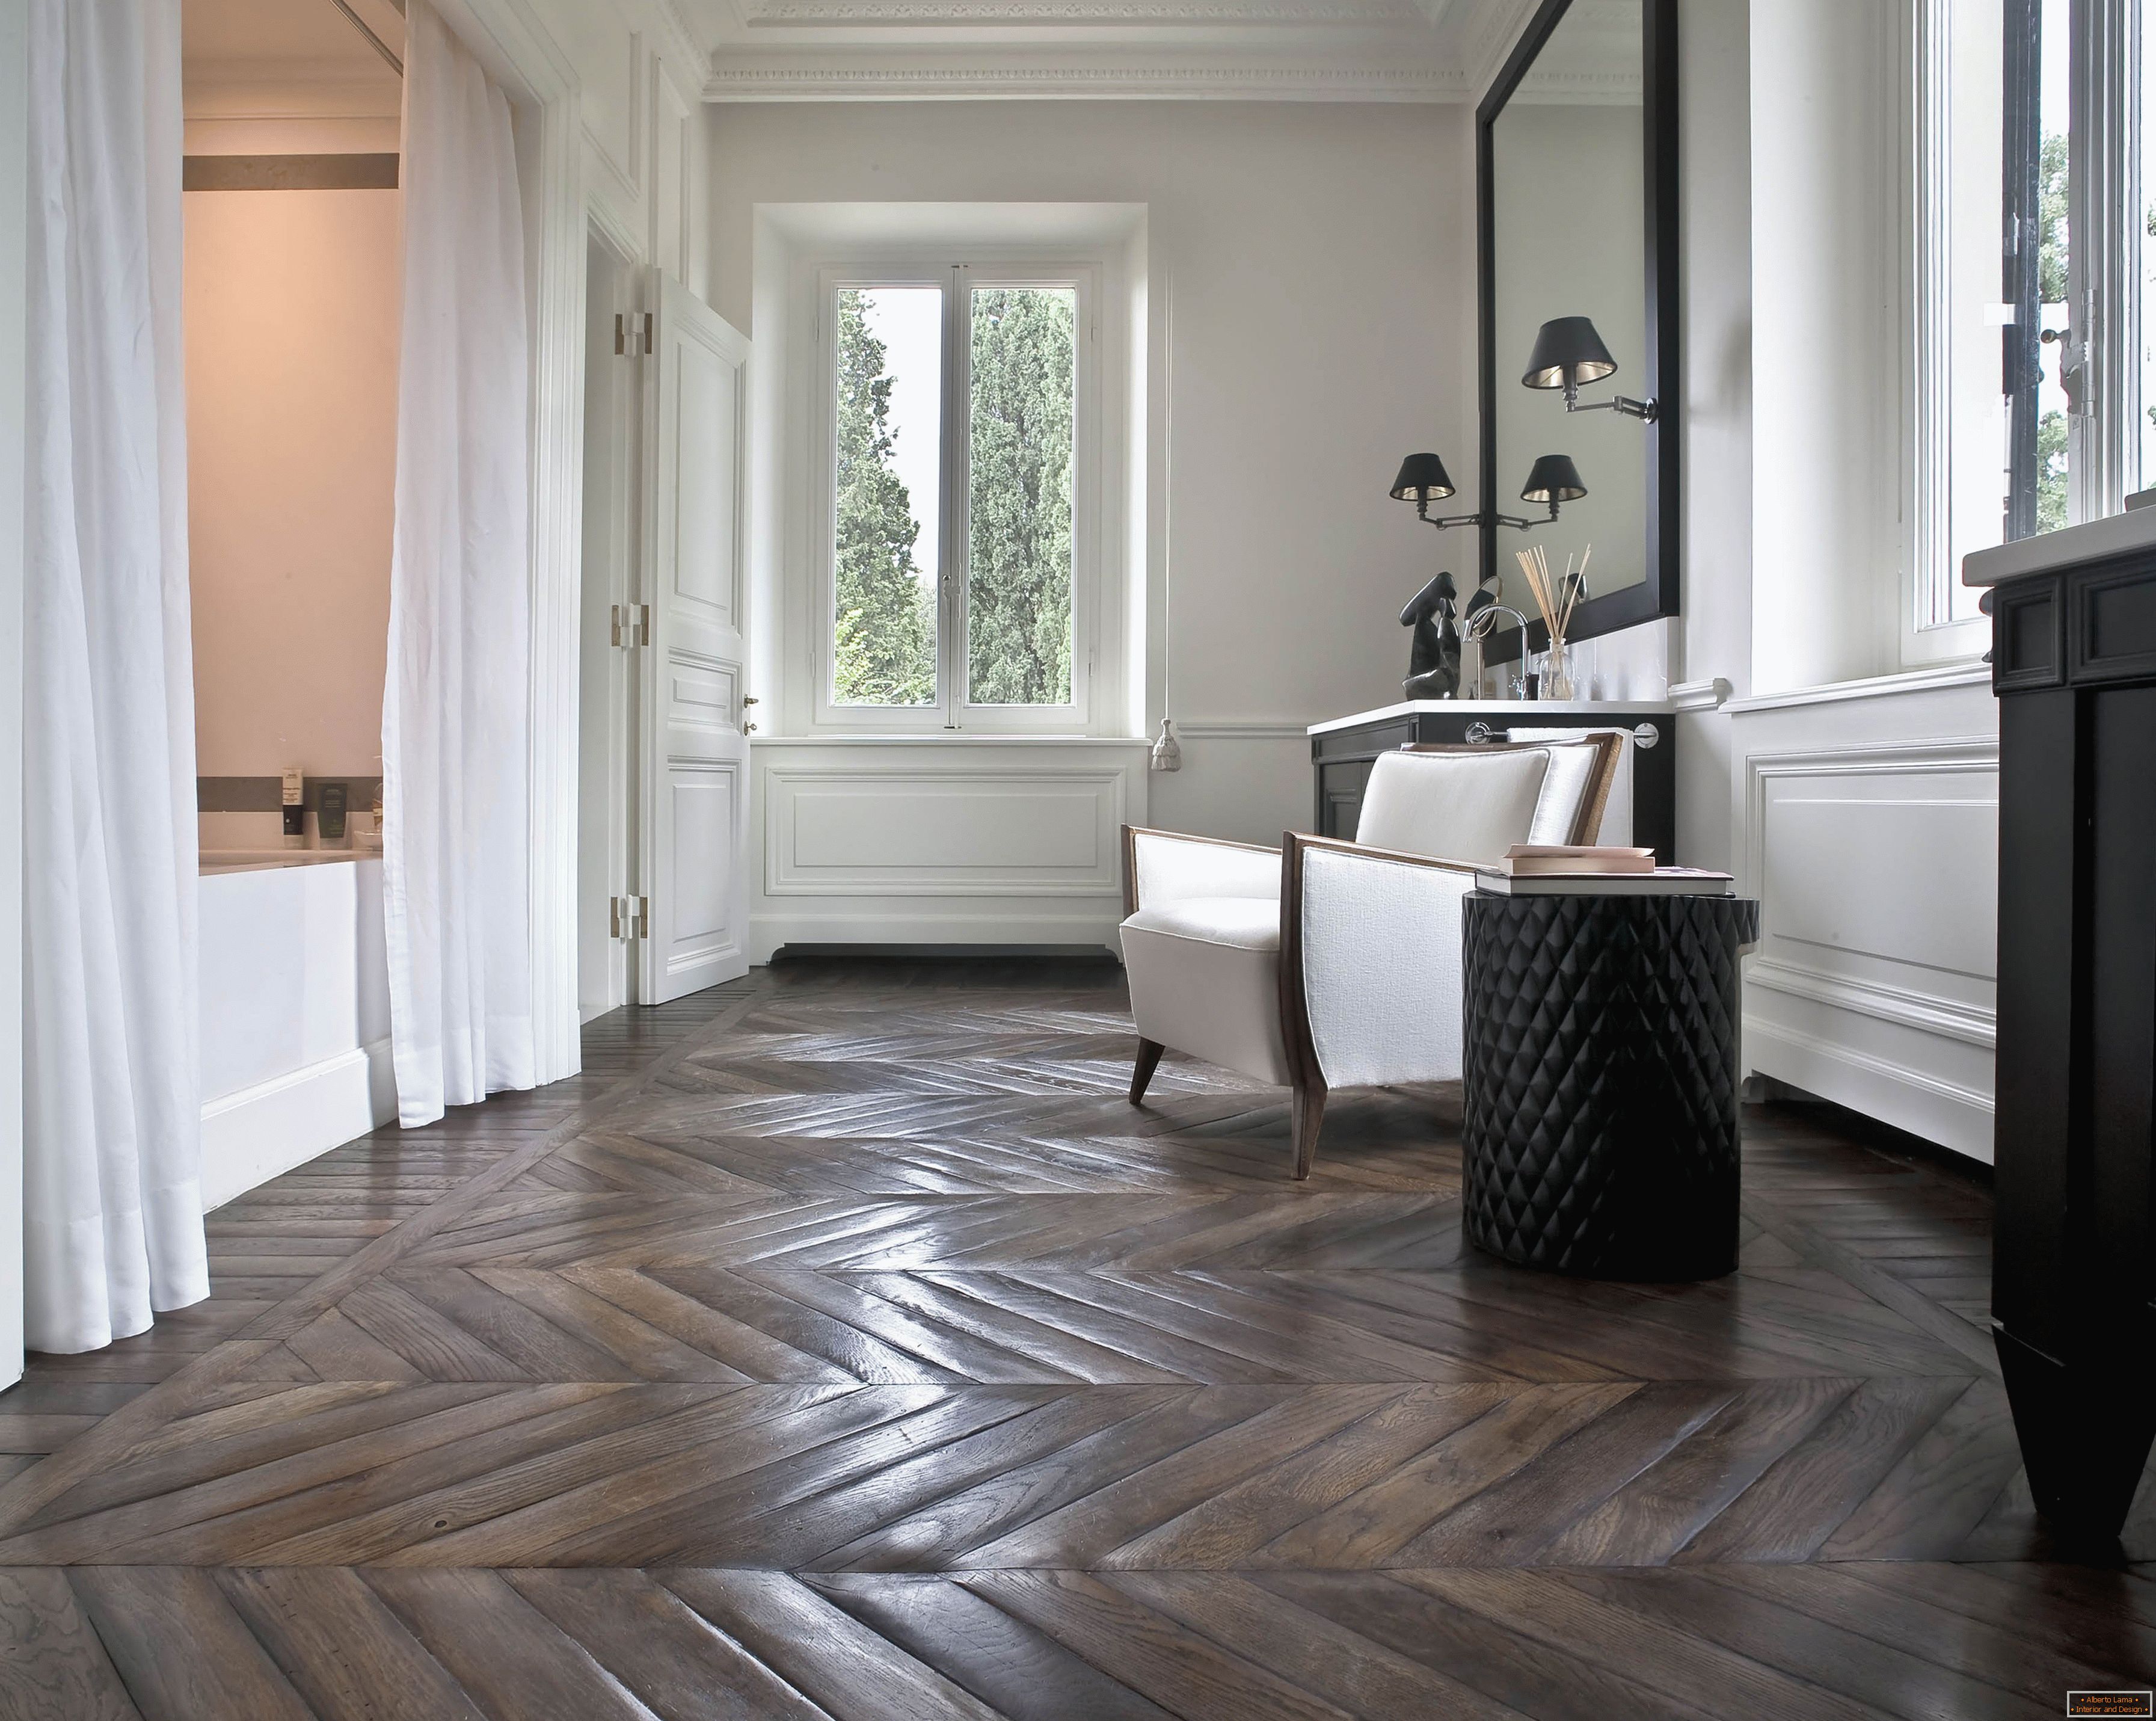 Floor made of natural parquet